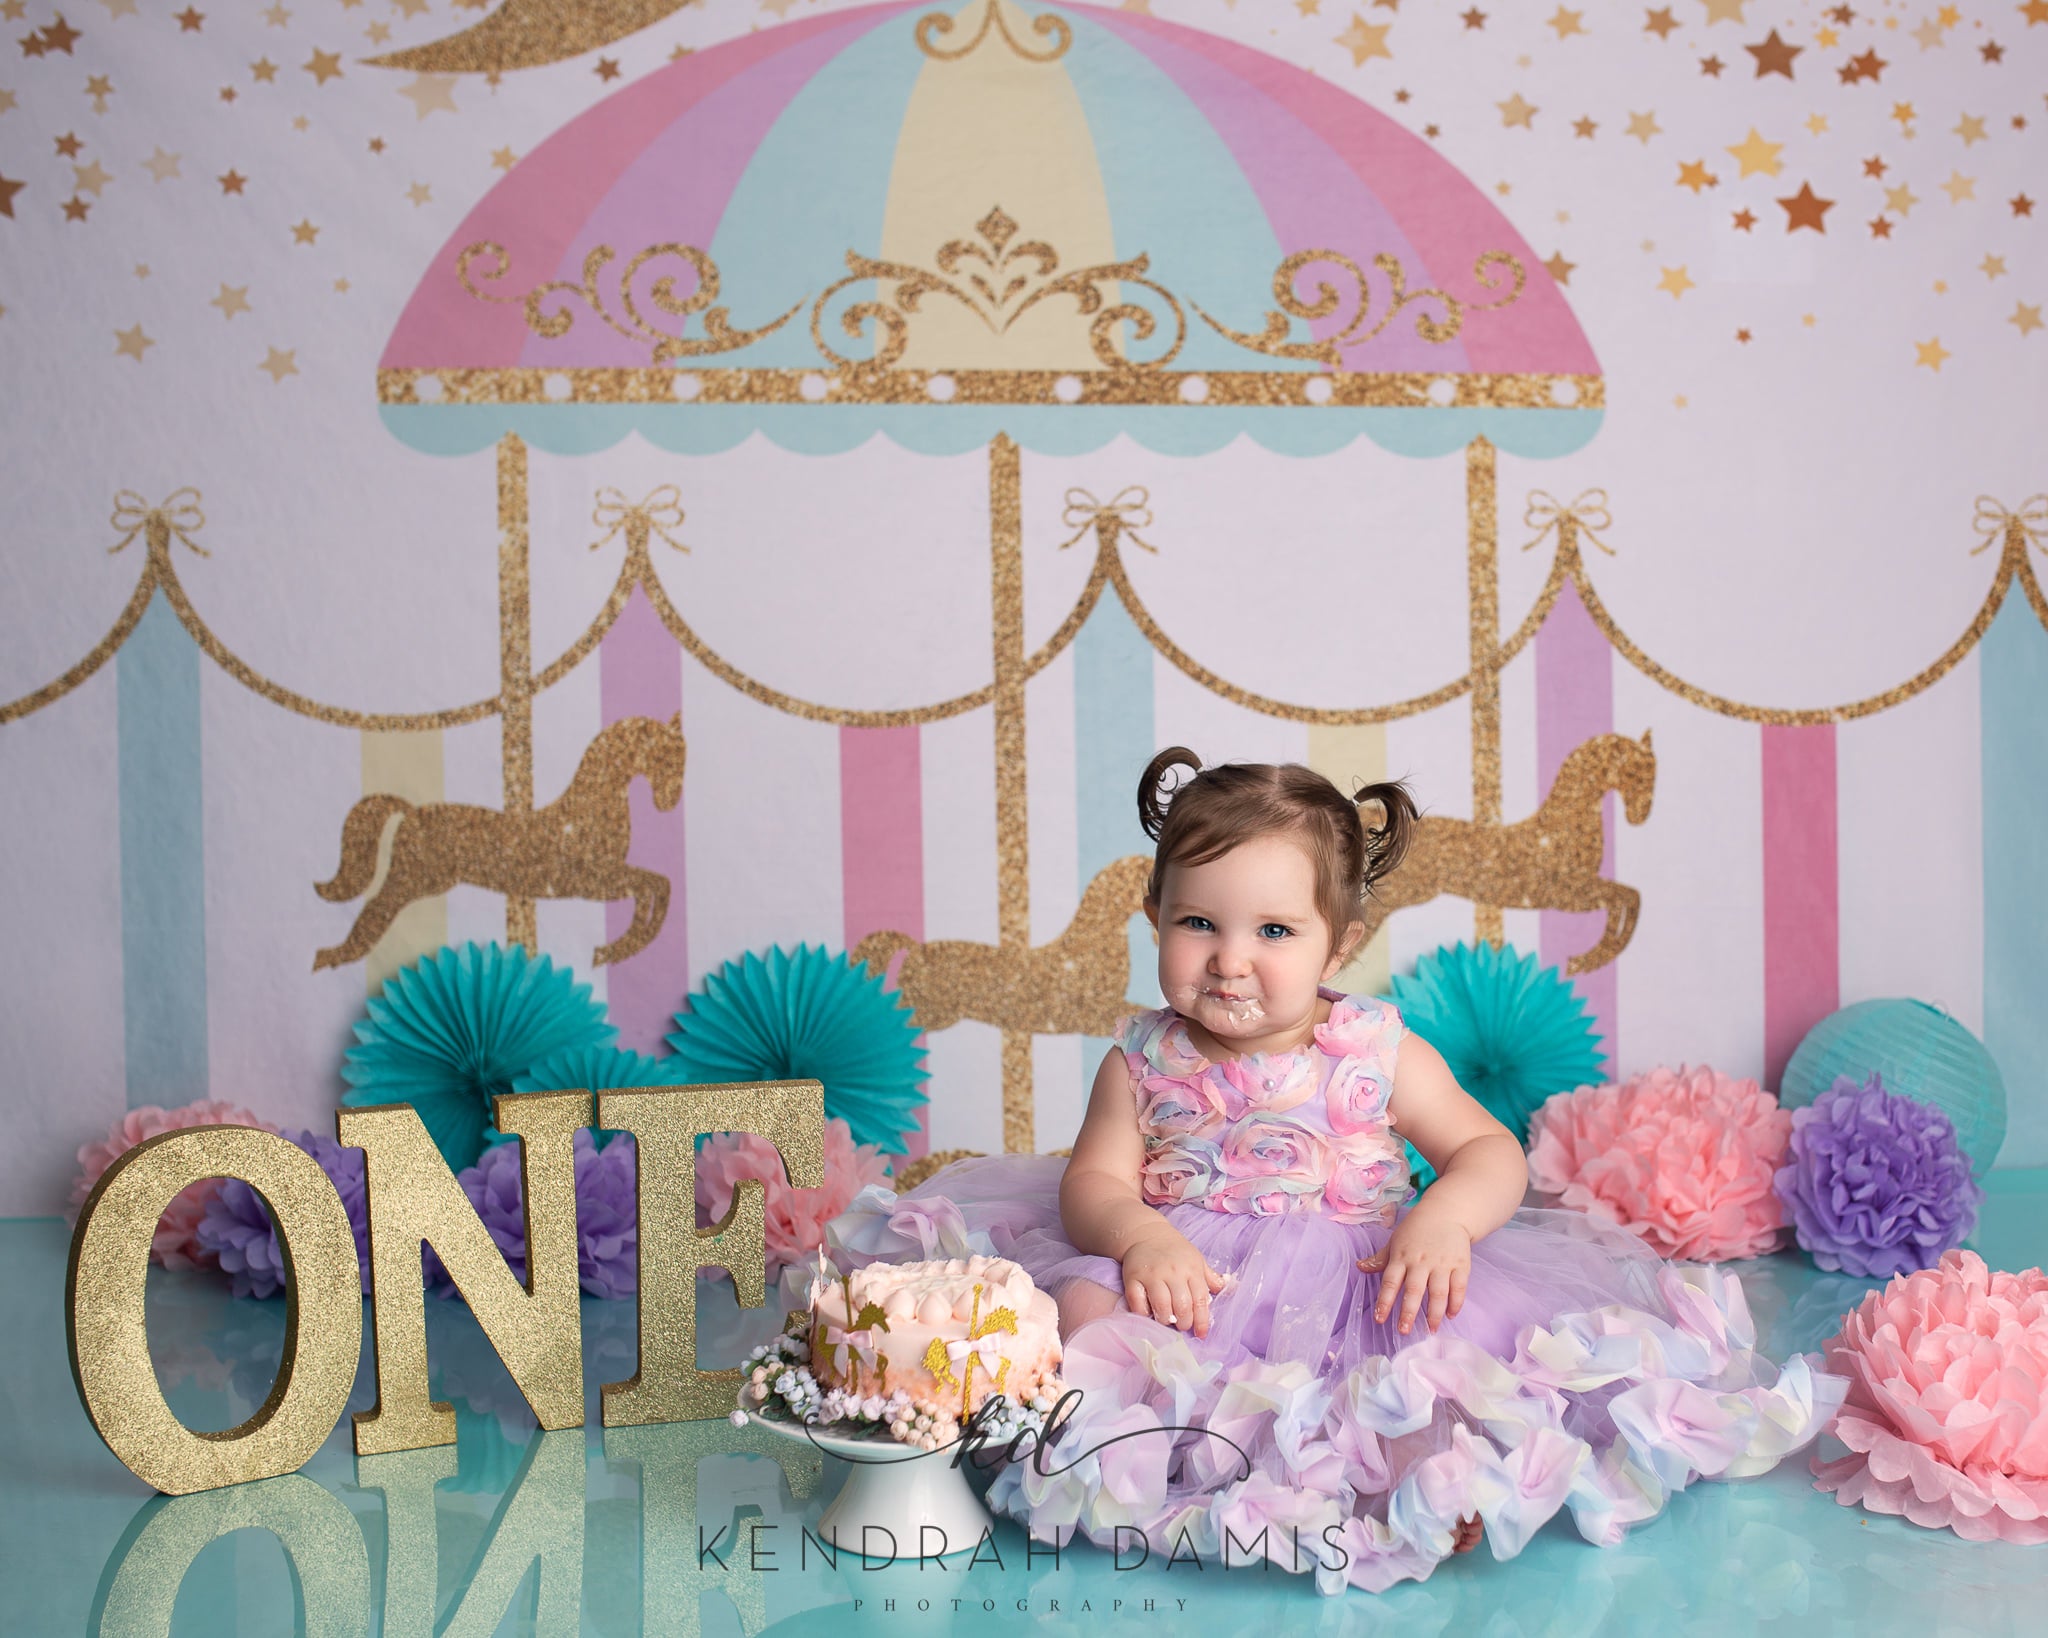 Kate Carousel Cake Smach Backdrop for Photography